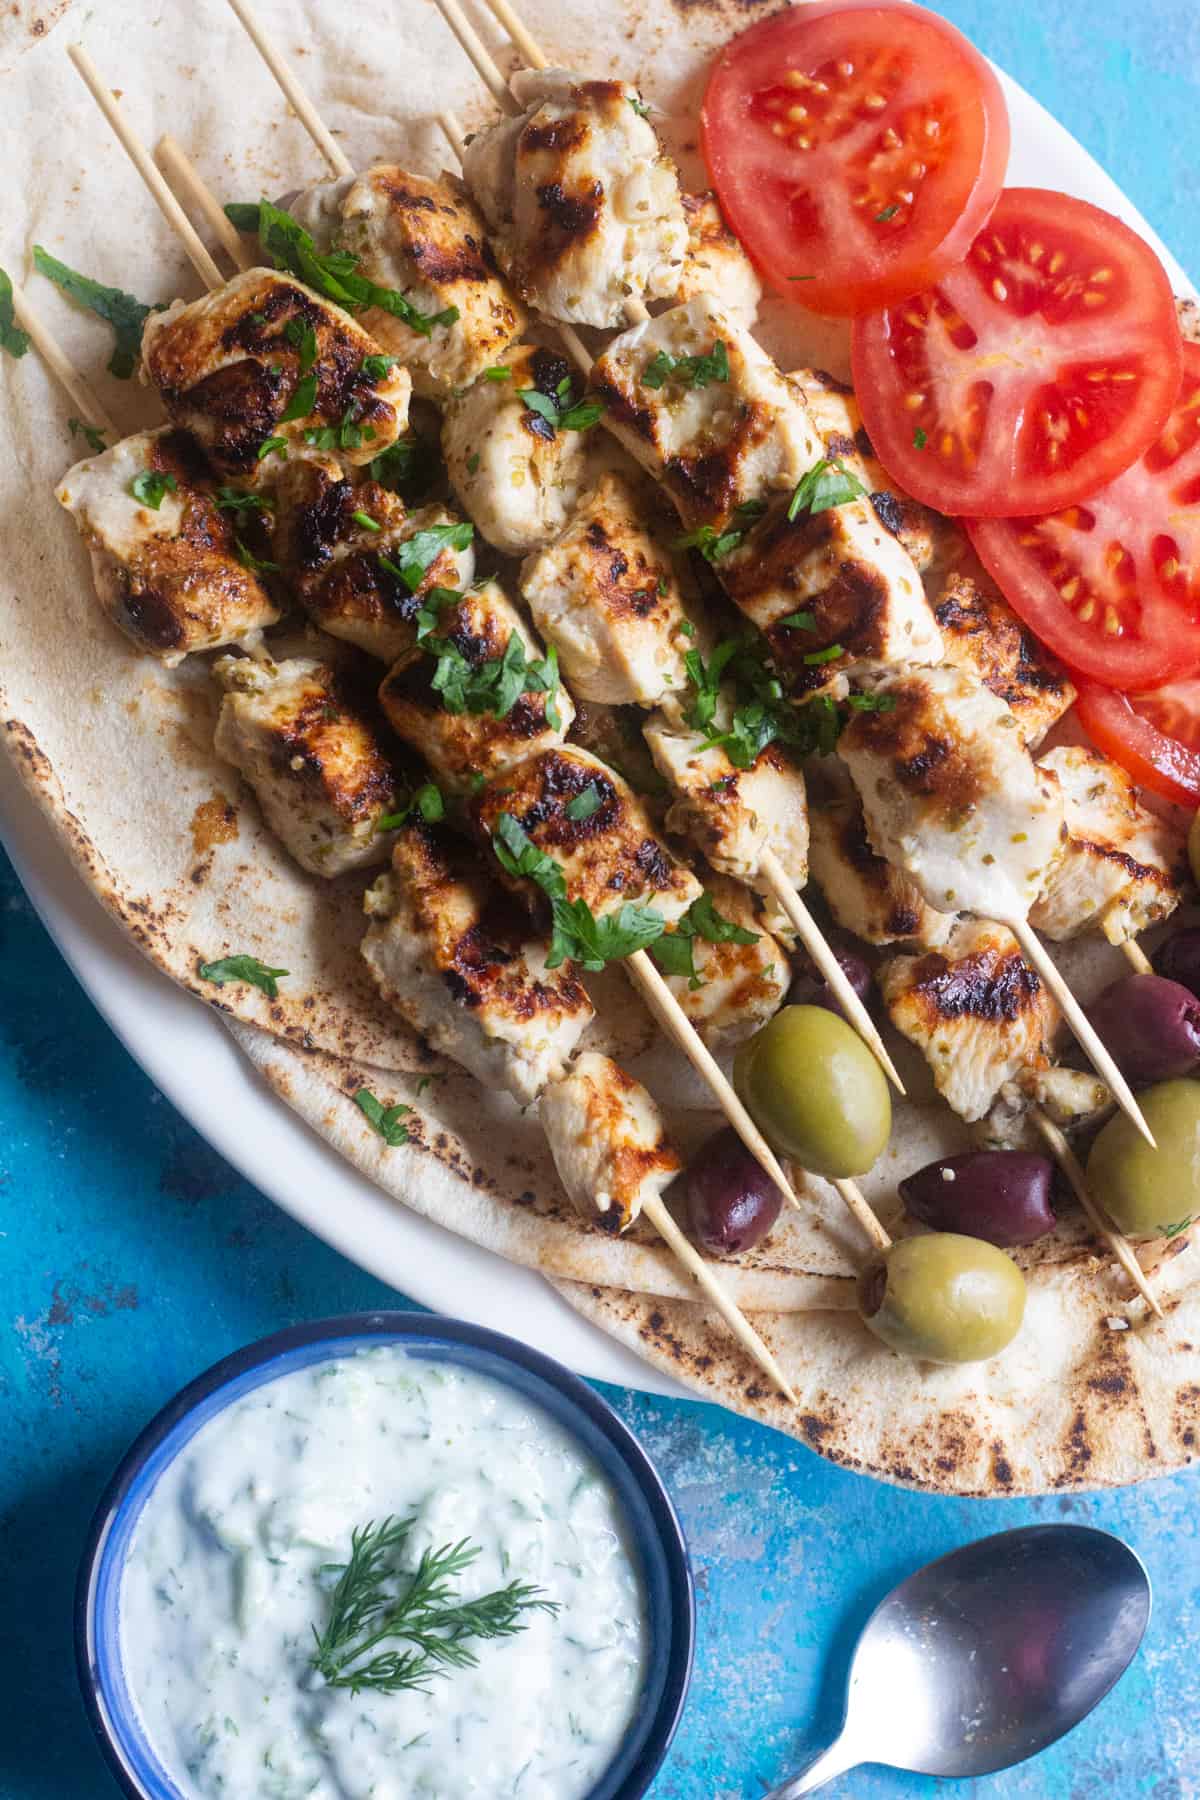 Try this easy recipe for homemade Greek chicken souvlaki. Made with a delicious garlic and lemon marinade, this classic street food is packed with amazing Mediterranean flavors and served with creamy tzatziki sauce.
